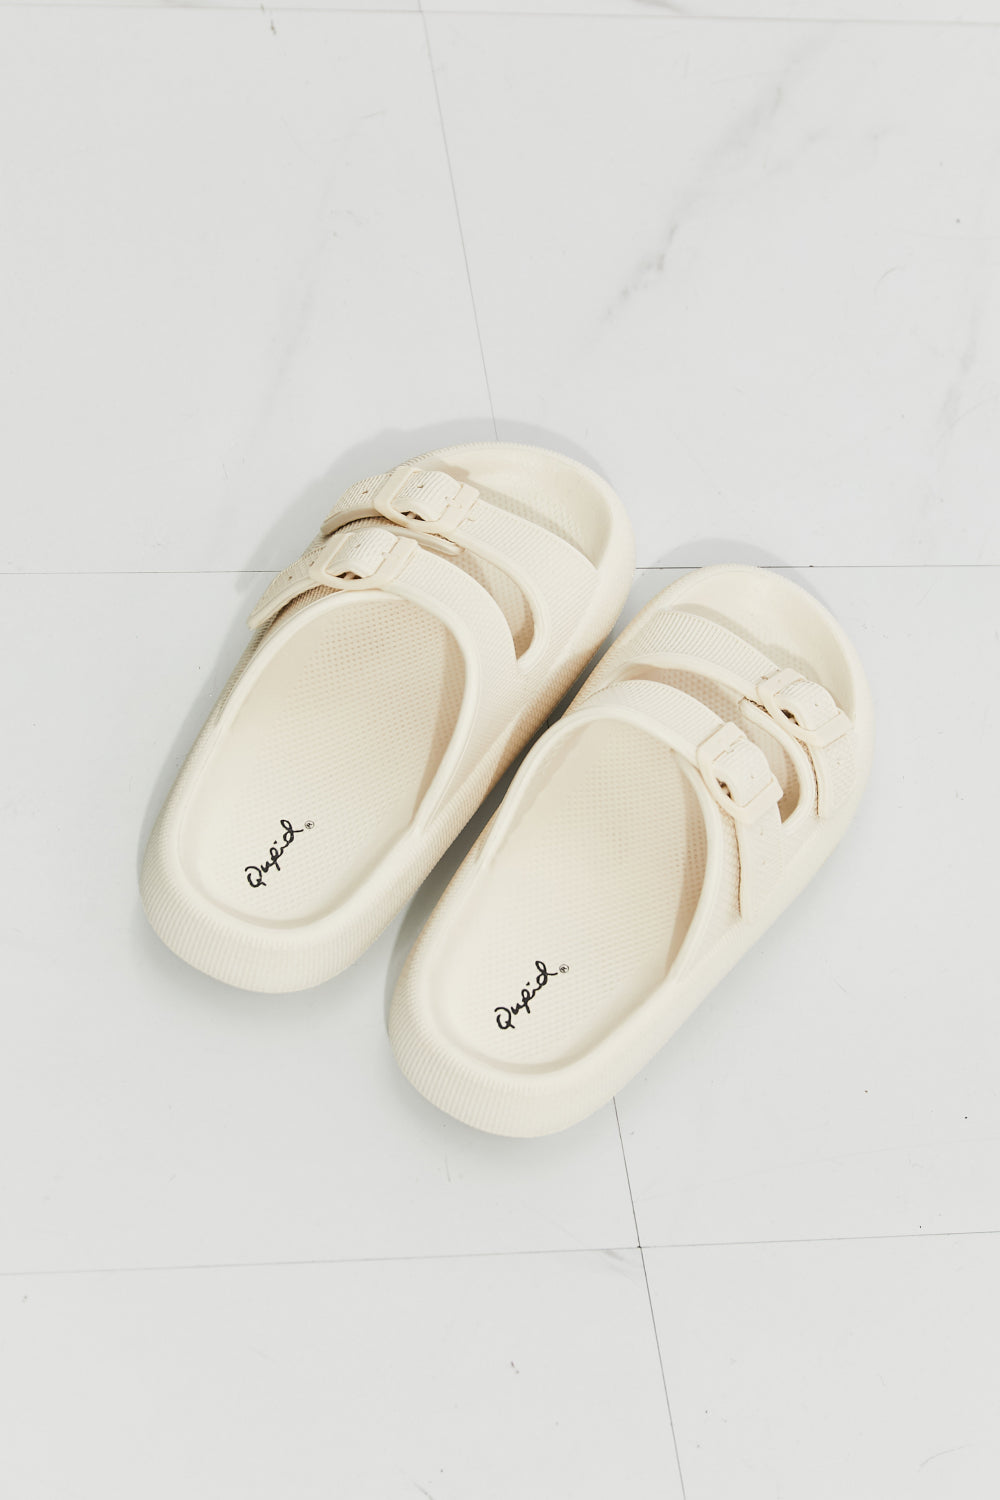 Qupid Comfy Casual Rubber Slide Sandal in Cream